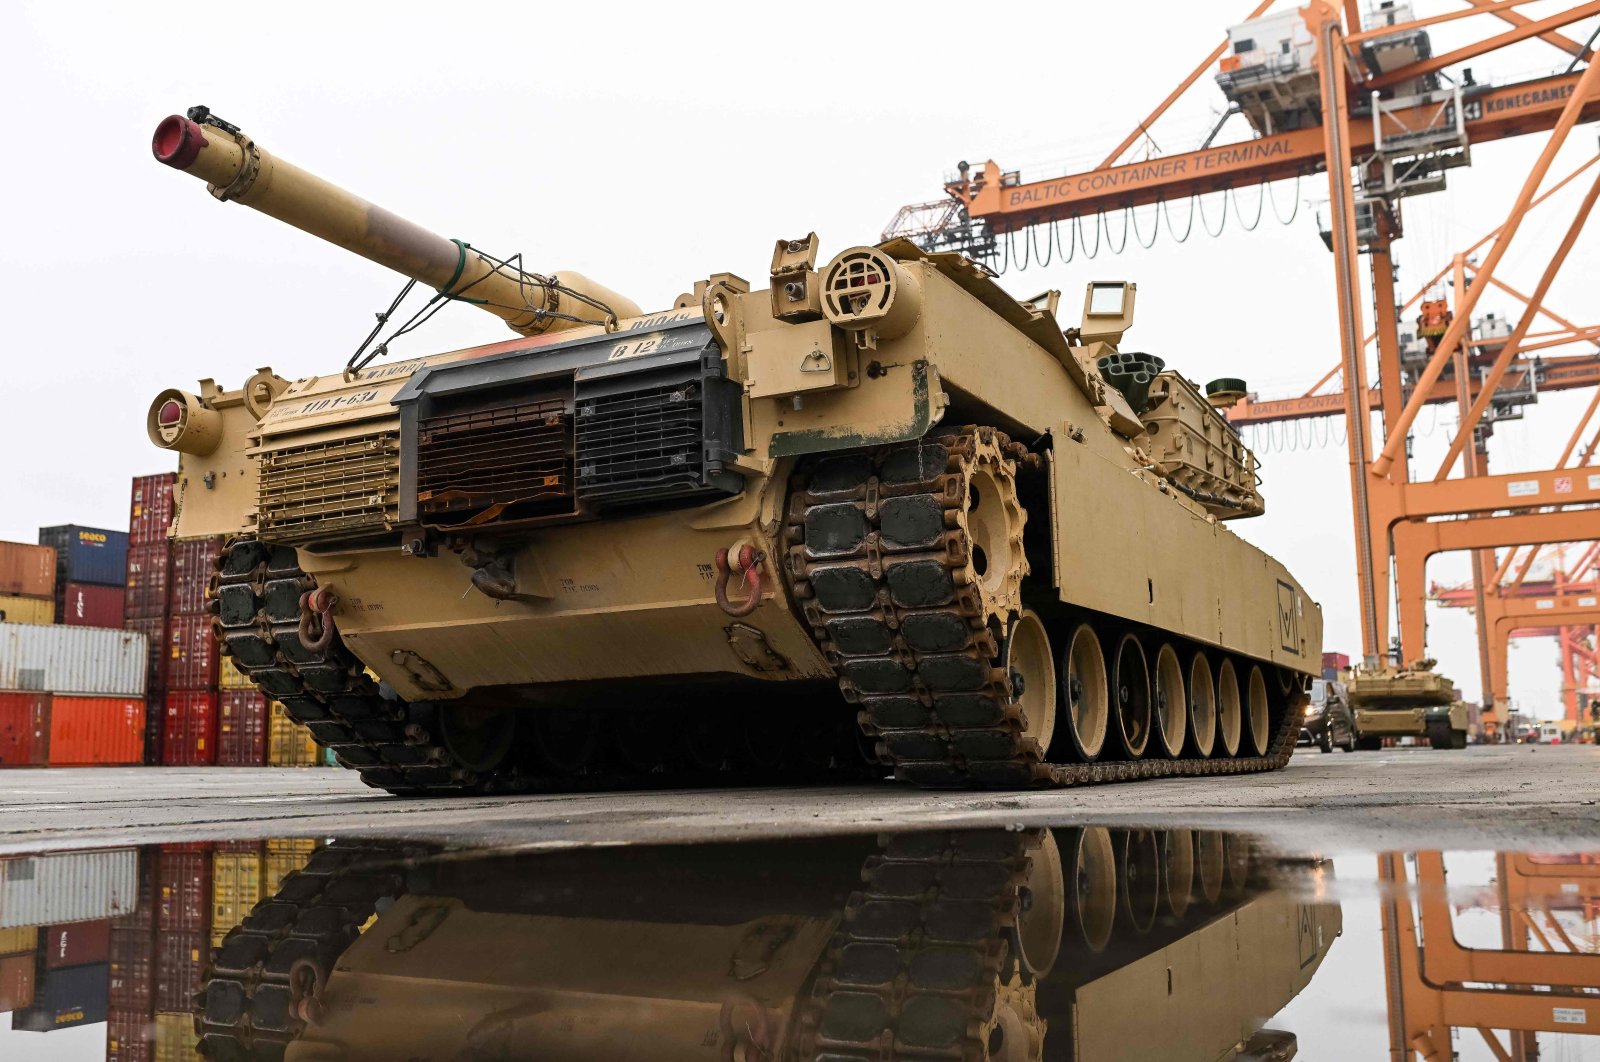 An M1A2 Abrams battle tank of the U.S. army that will be used for military exercises by the 2nd Armored Brigade Combat Team, is pictured at the Baltic Container Terminal in Gdynia, Dec. 3, 2022. (AFP File Photo)